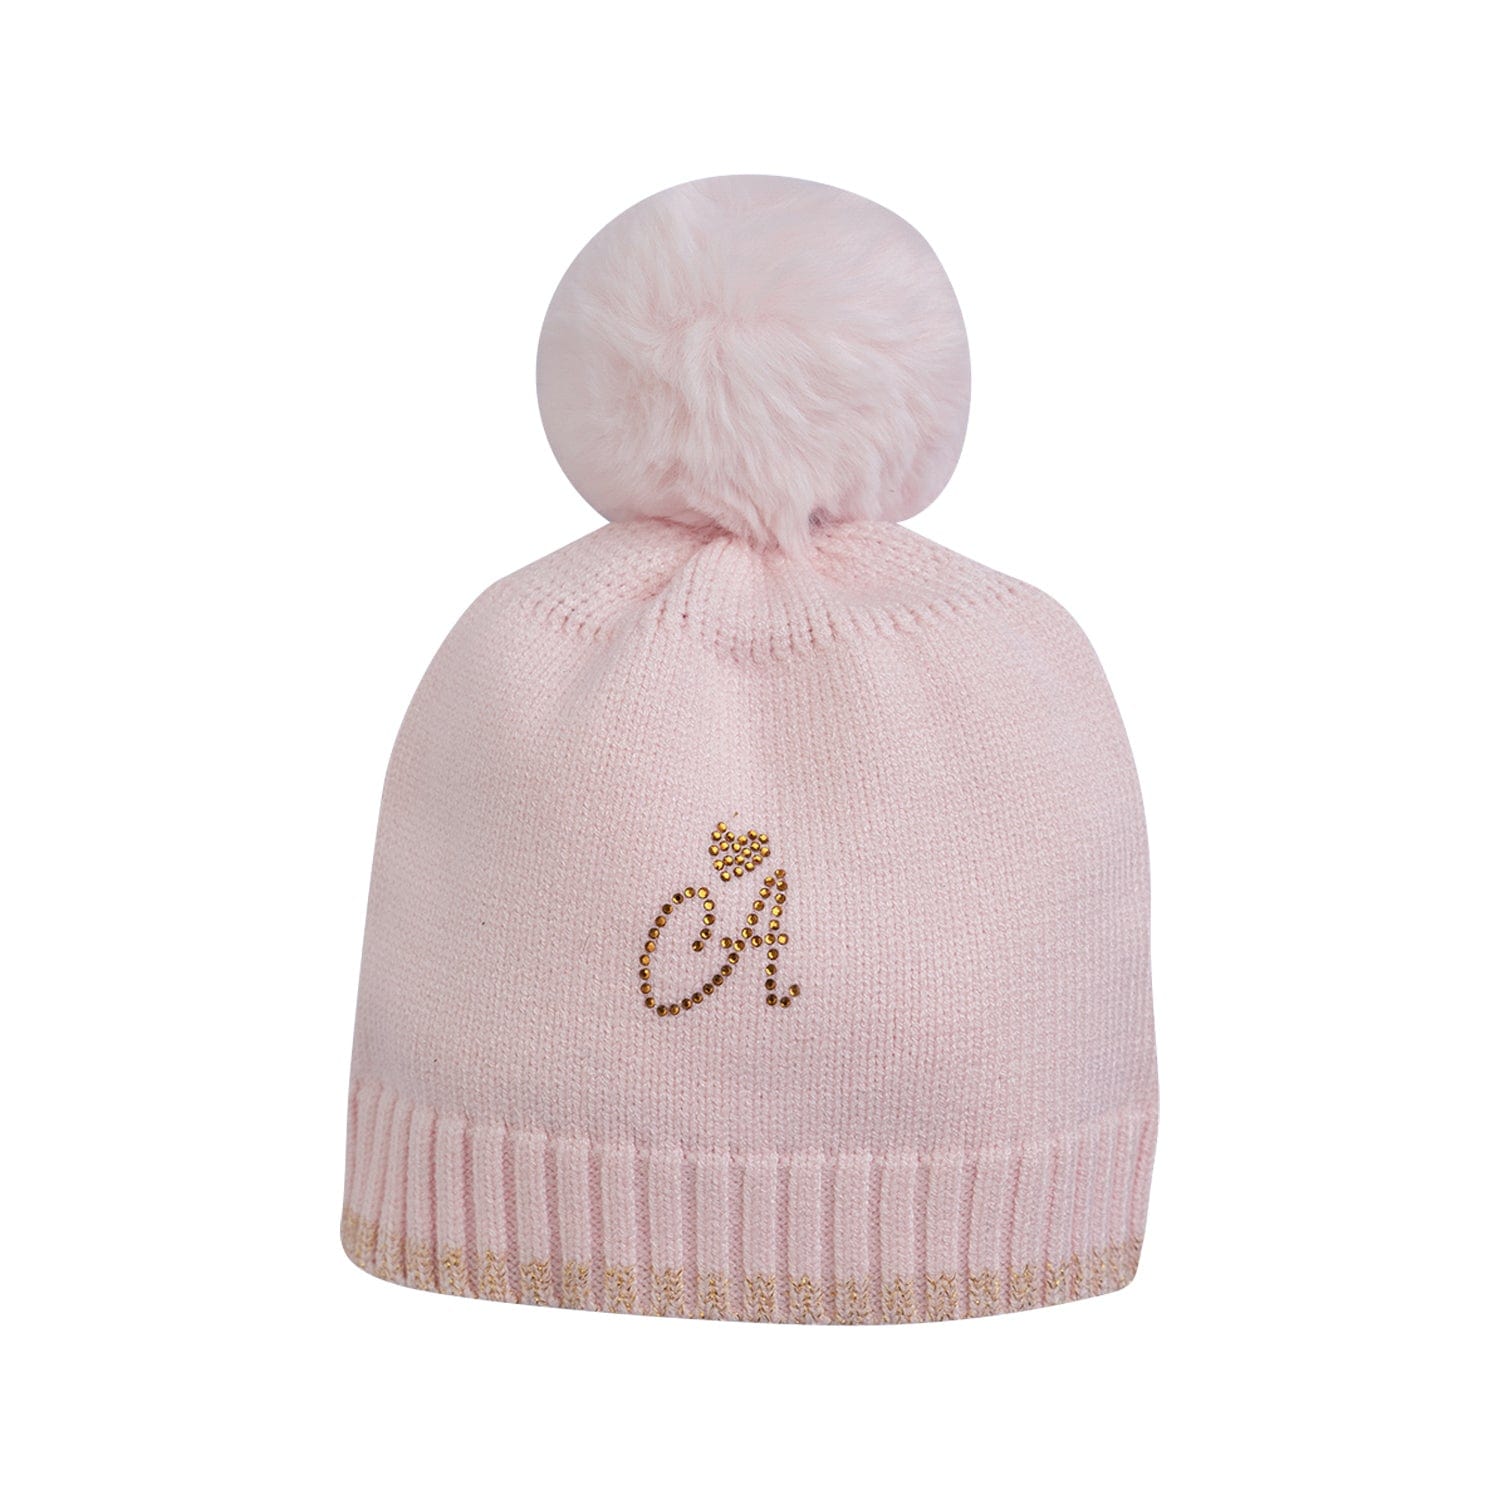 LITTLE A - Check Me Out Emberley KnittedPom Pom Hat - Pink